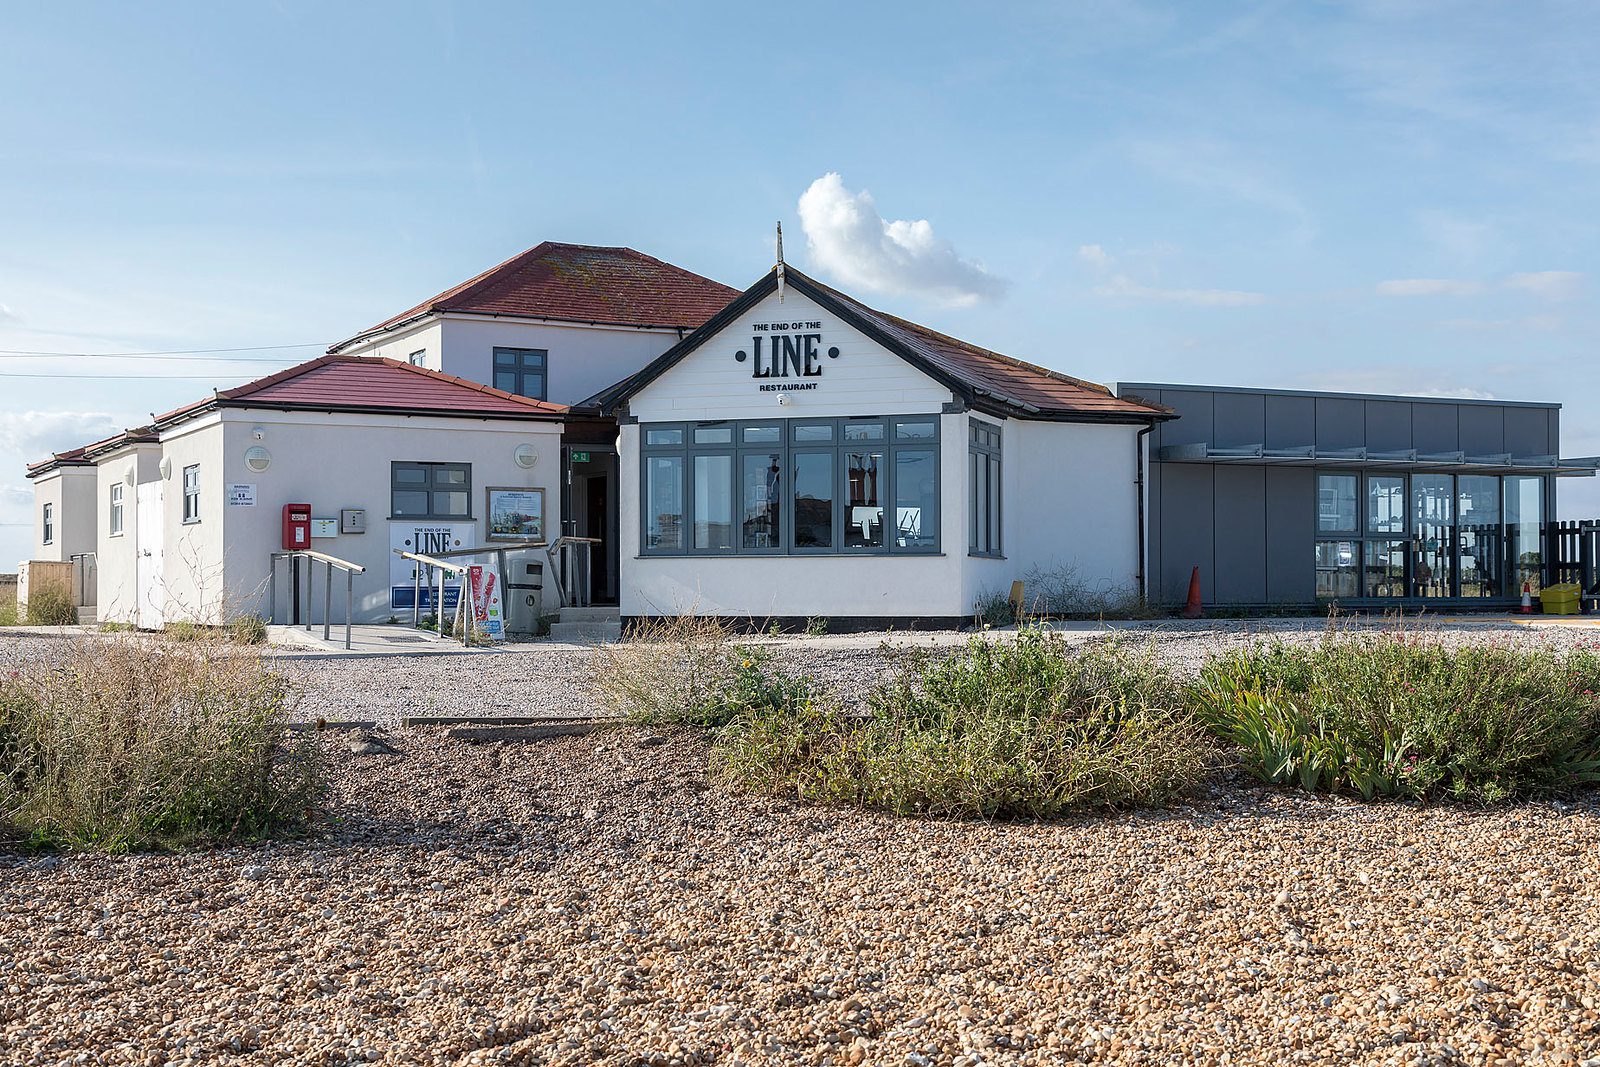 End of the Line station and cafe at Dungeness